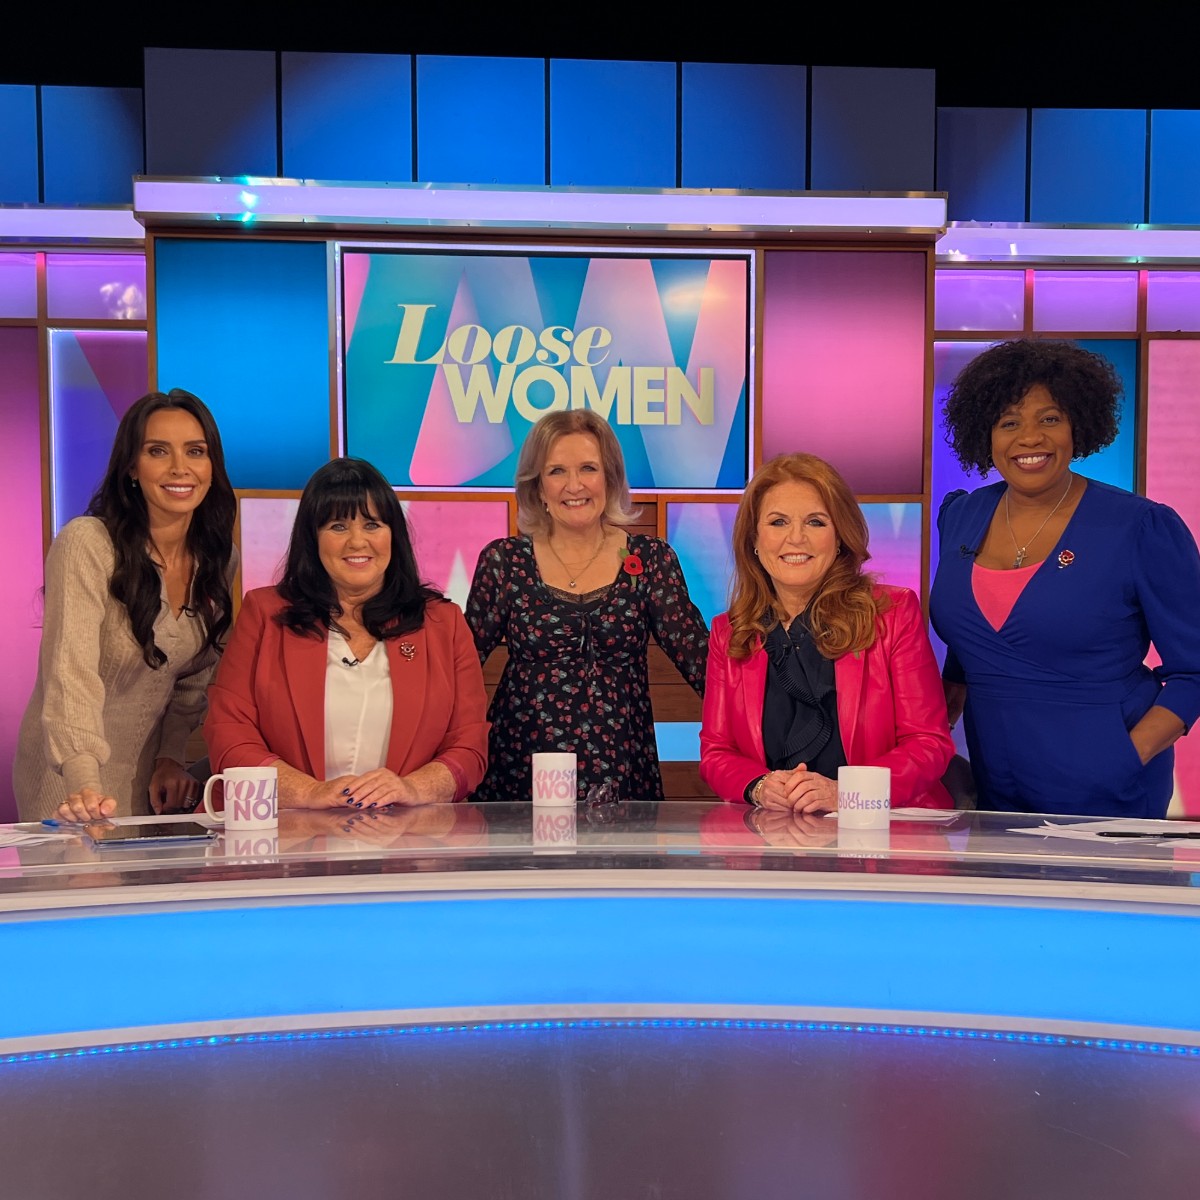 We’re thrilled that our clinical nurse specialist Addie will be joining the @loosewomen panel today alongside @SarahTheDuchess. Addie will be sharing expert information and support about breast checking, and myth-busting about mammograms. Tune in @ITV from 12:30pm!